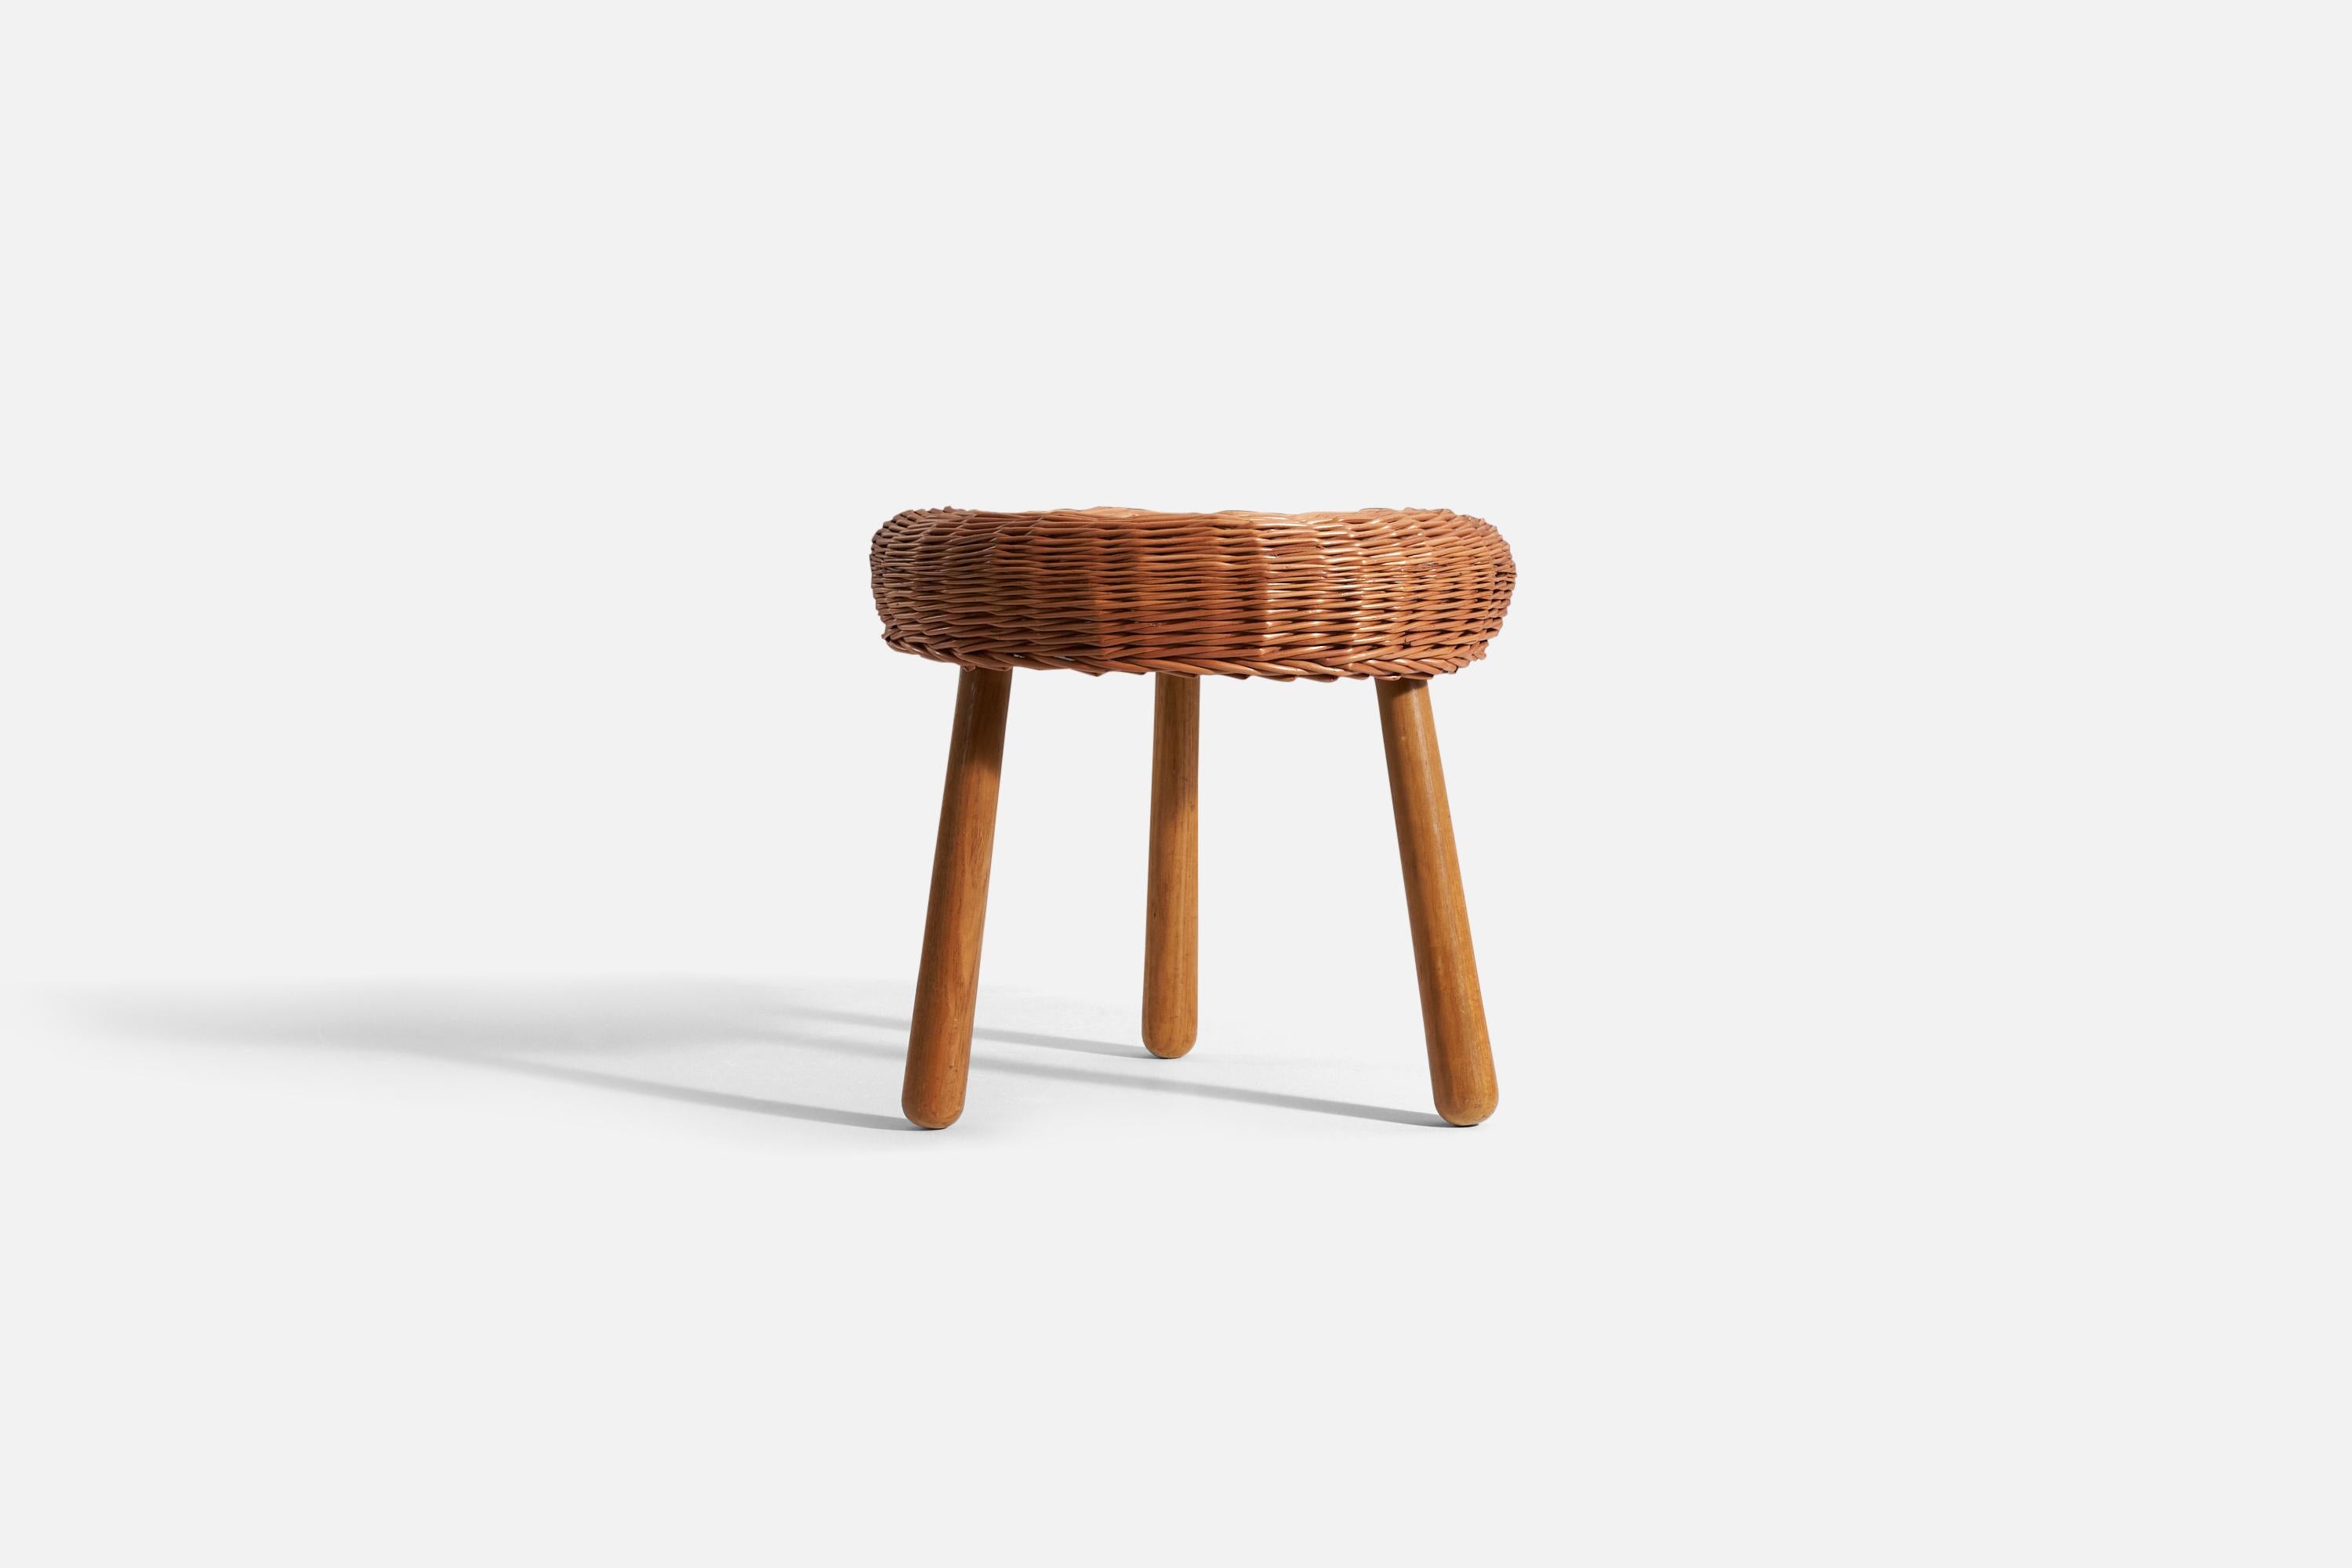 Mid-20th Century Tony Paul, Stool, Wicker, Wood, United States, 1950s For Sale